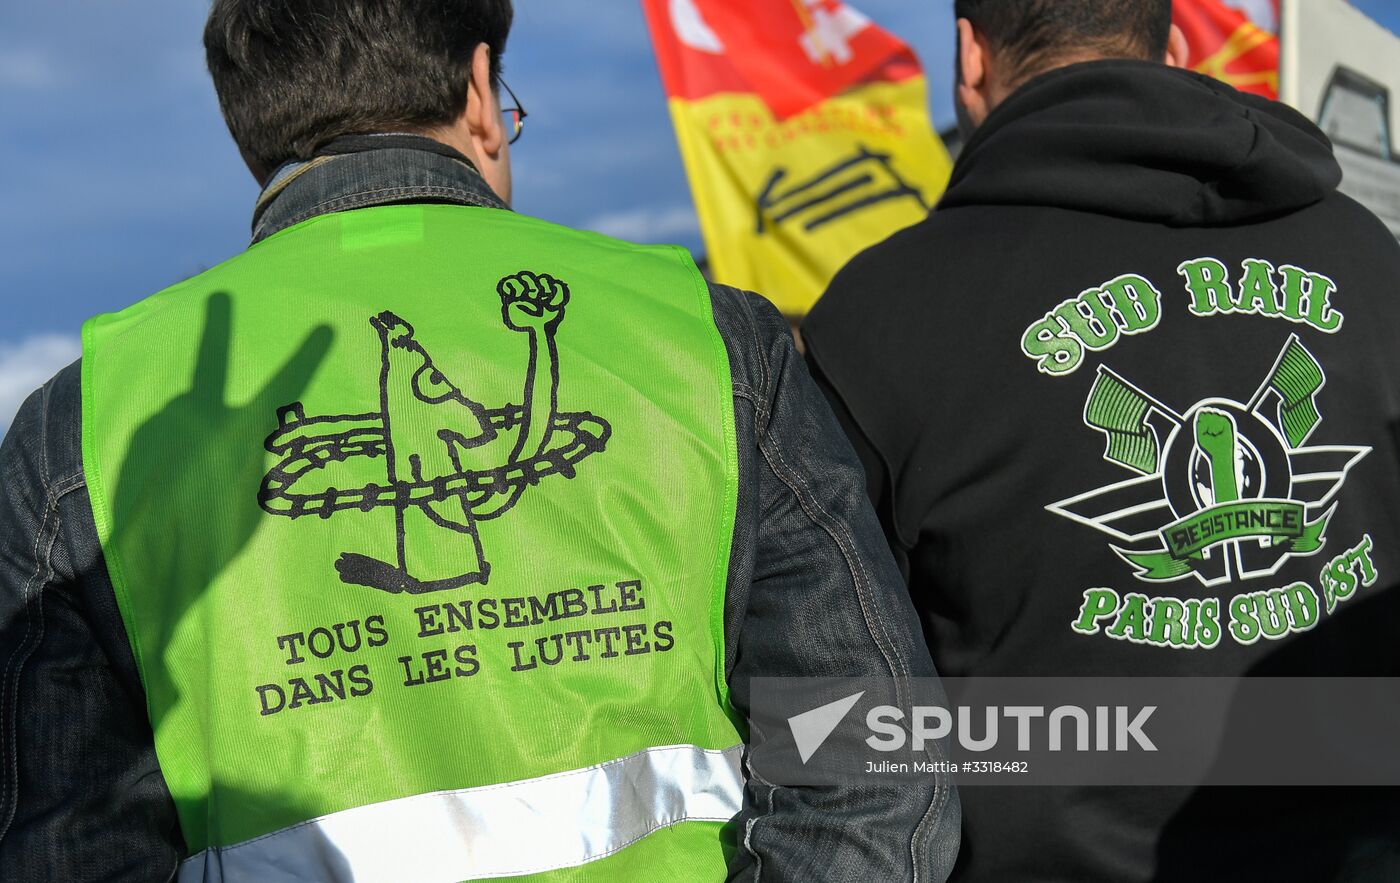 Rail workers' protest in France